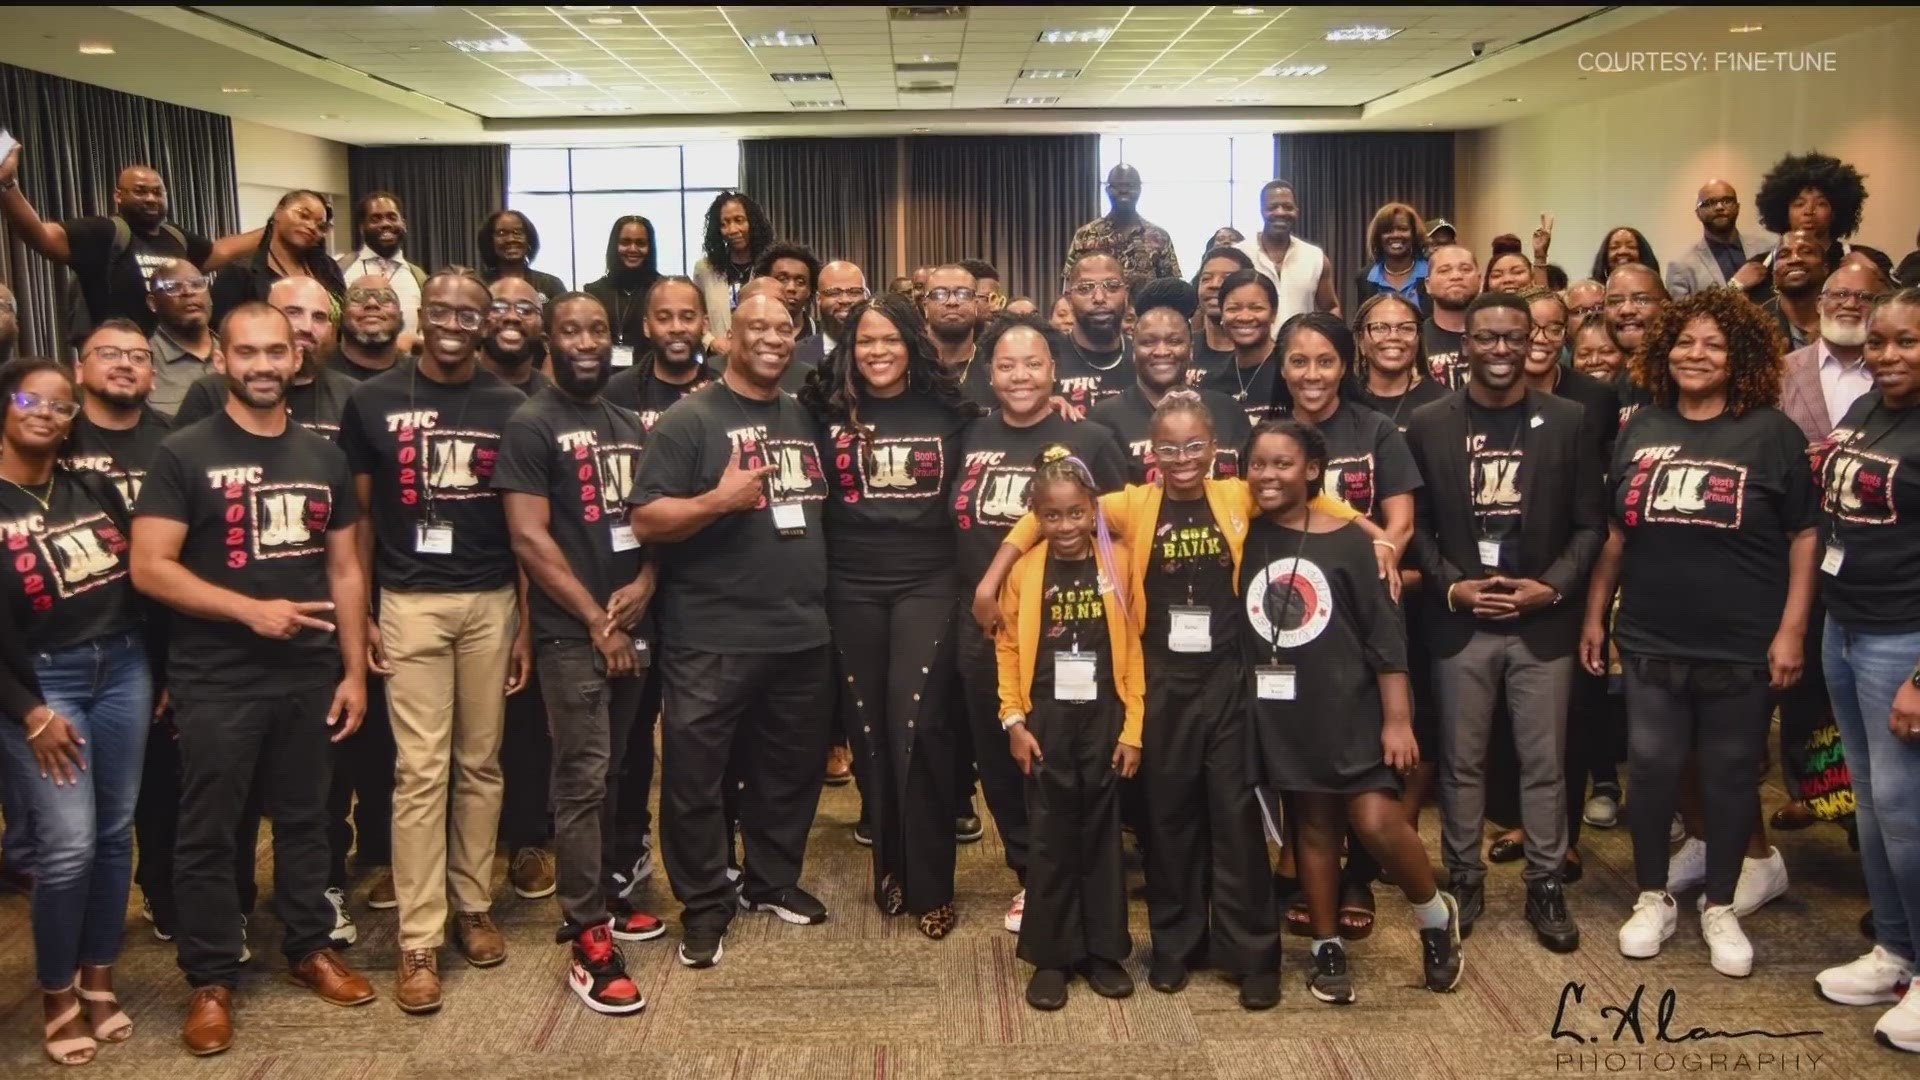 A conference focused on helping young Black male students succeed in life is taking the boots on the ground approach.